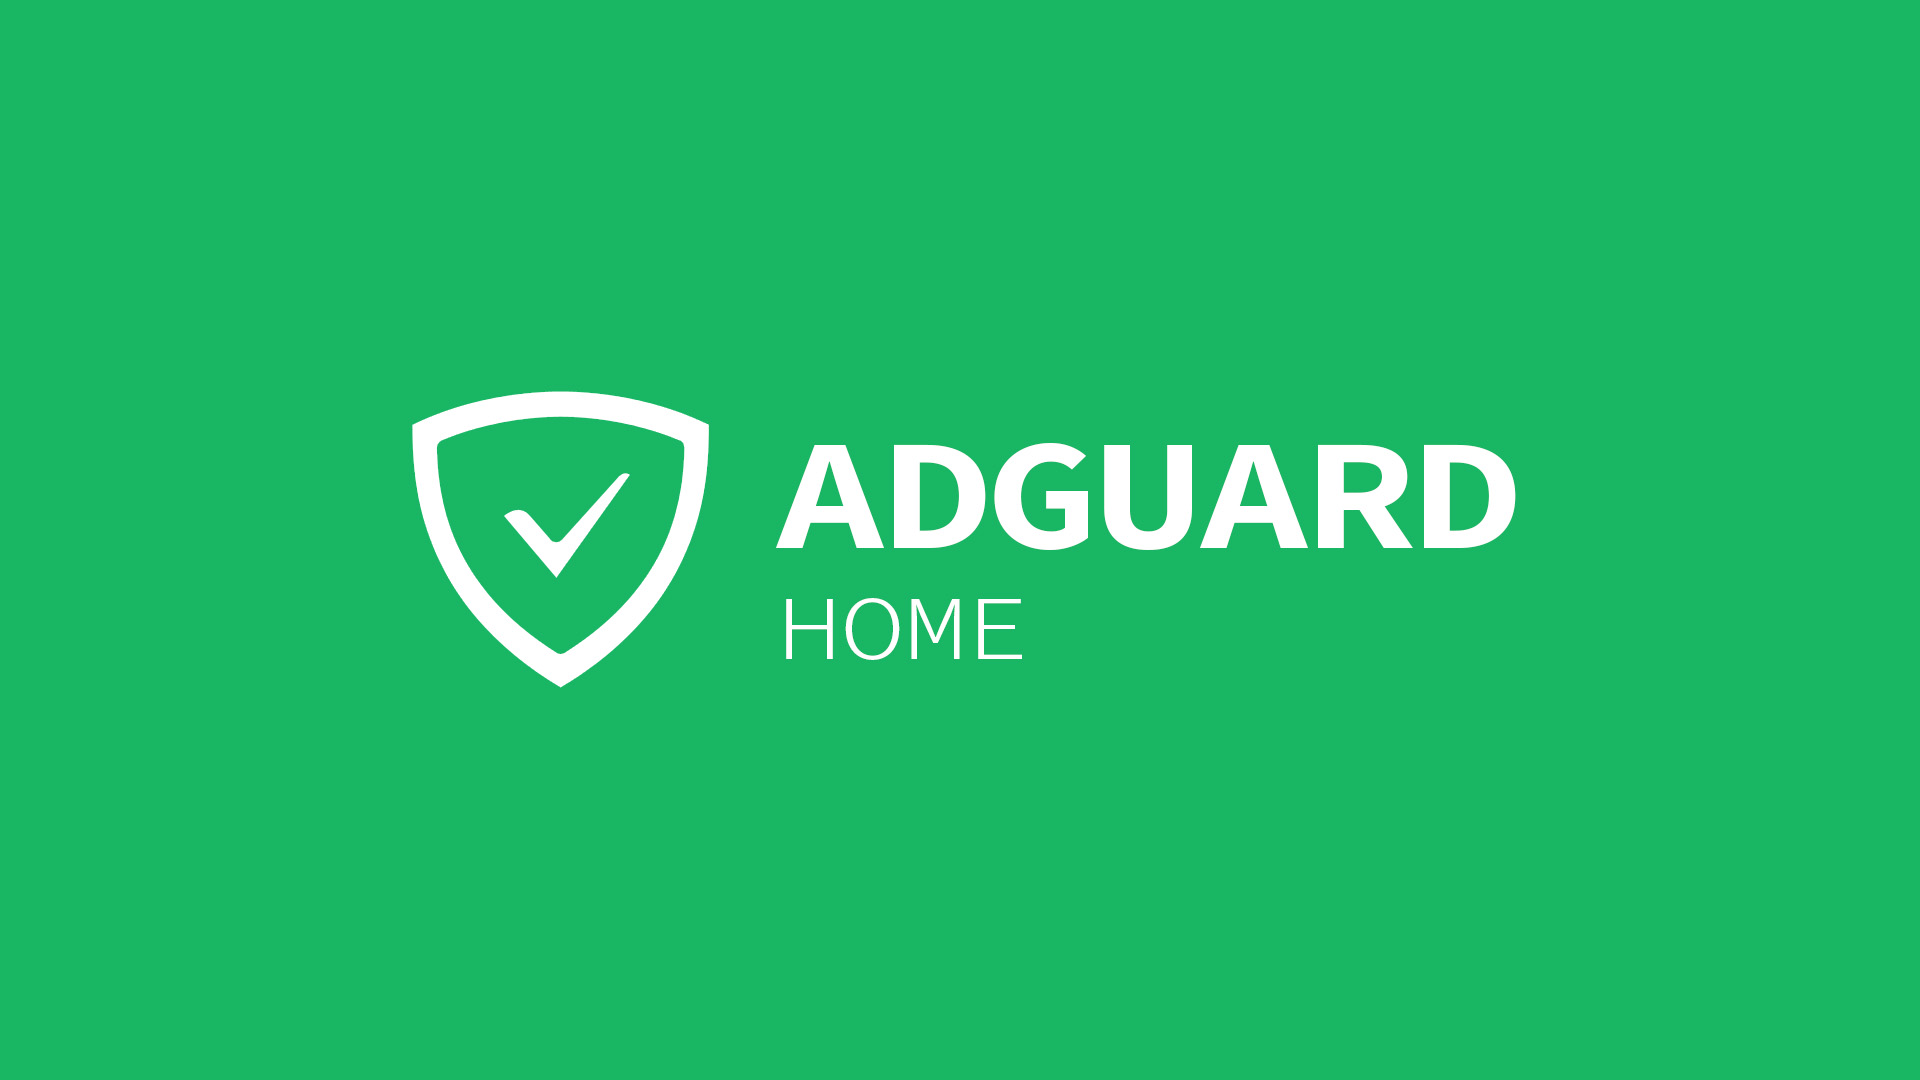 adguard home releases